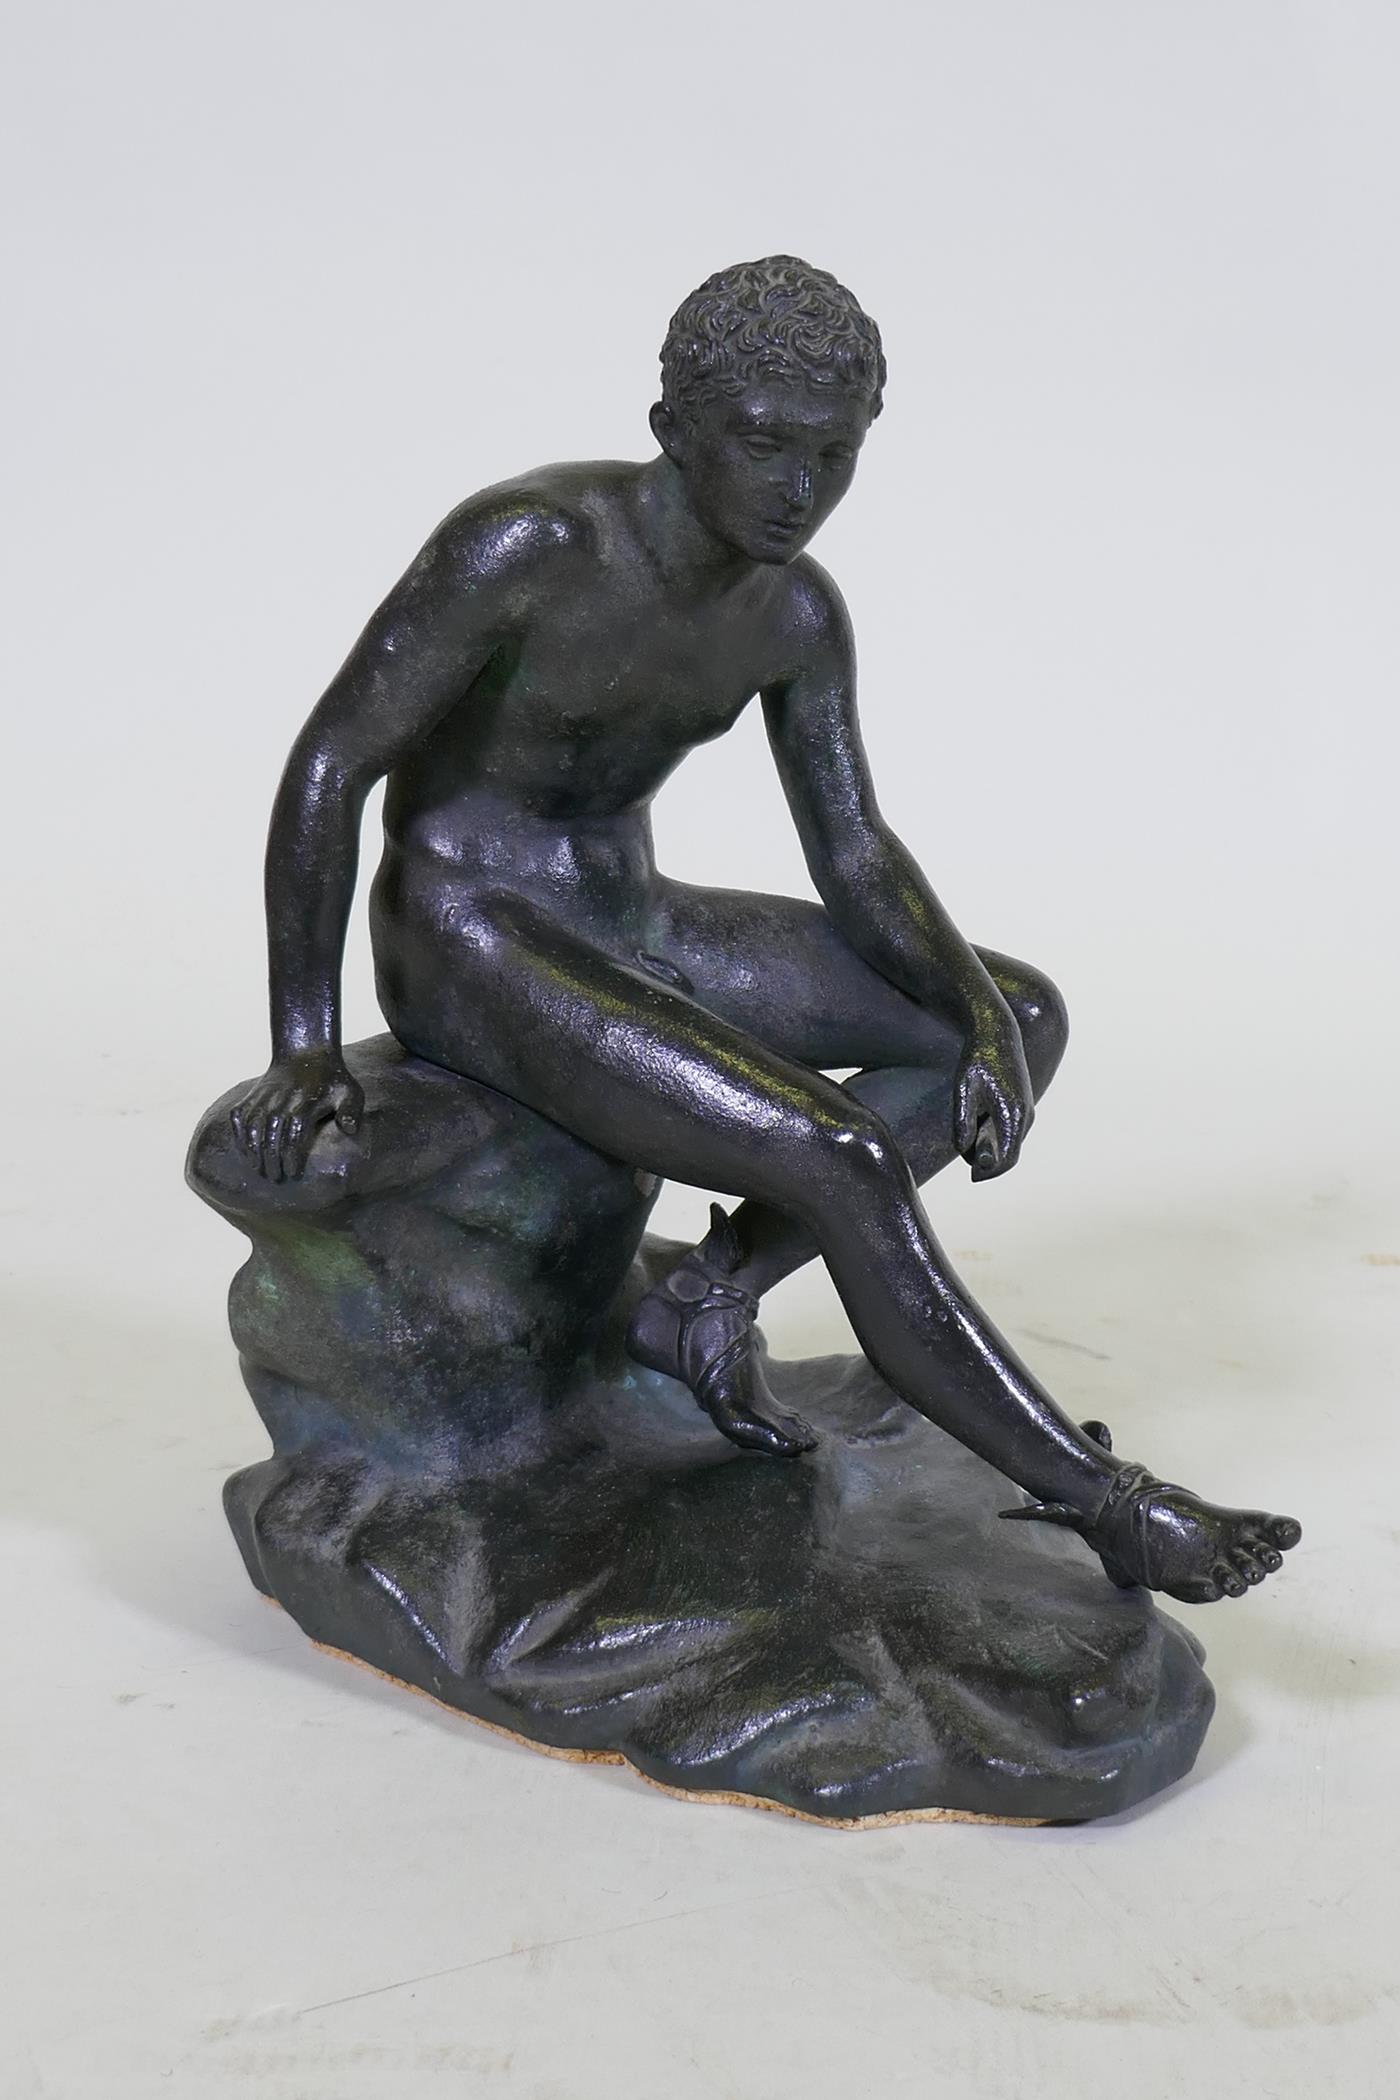 A C19th Grand Tour bronze figure of Hermes/Mercury after the statue found at the Villa of the - Image 2 of 4